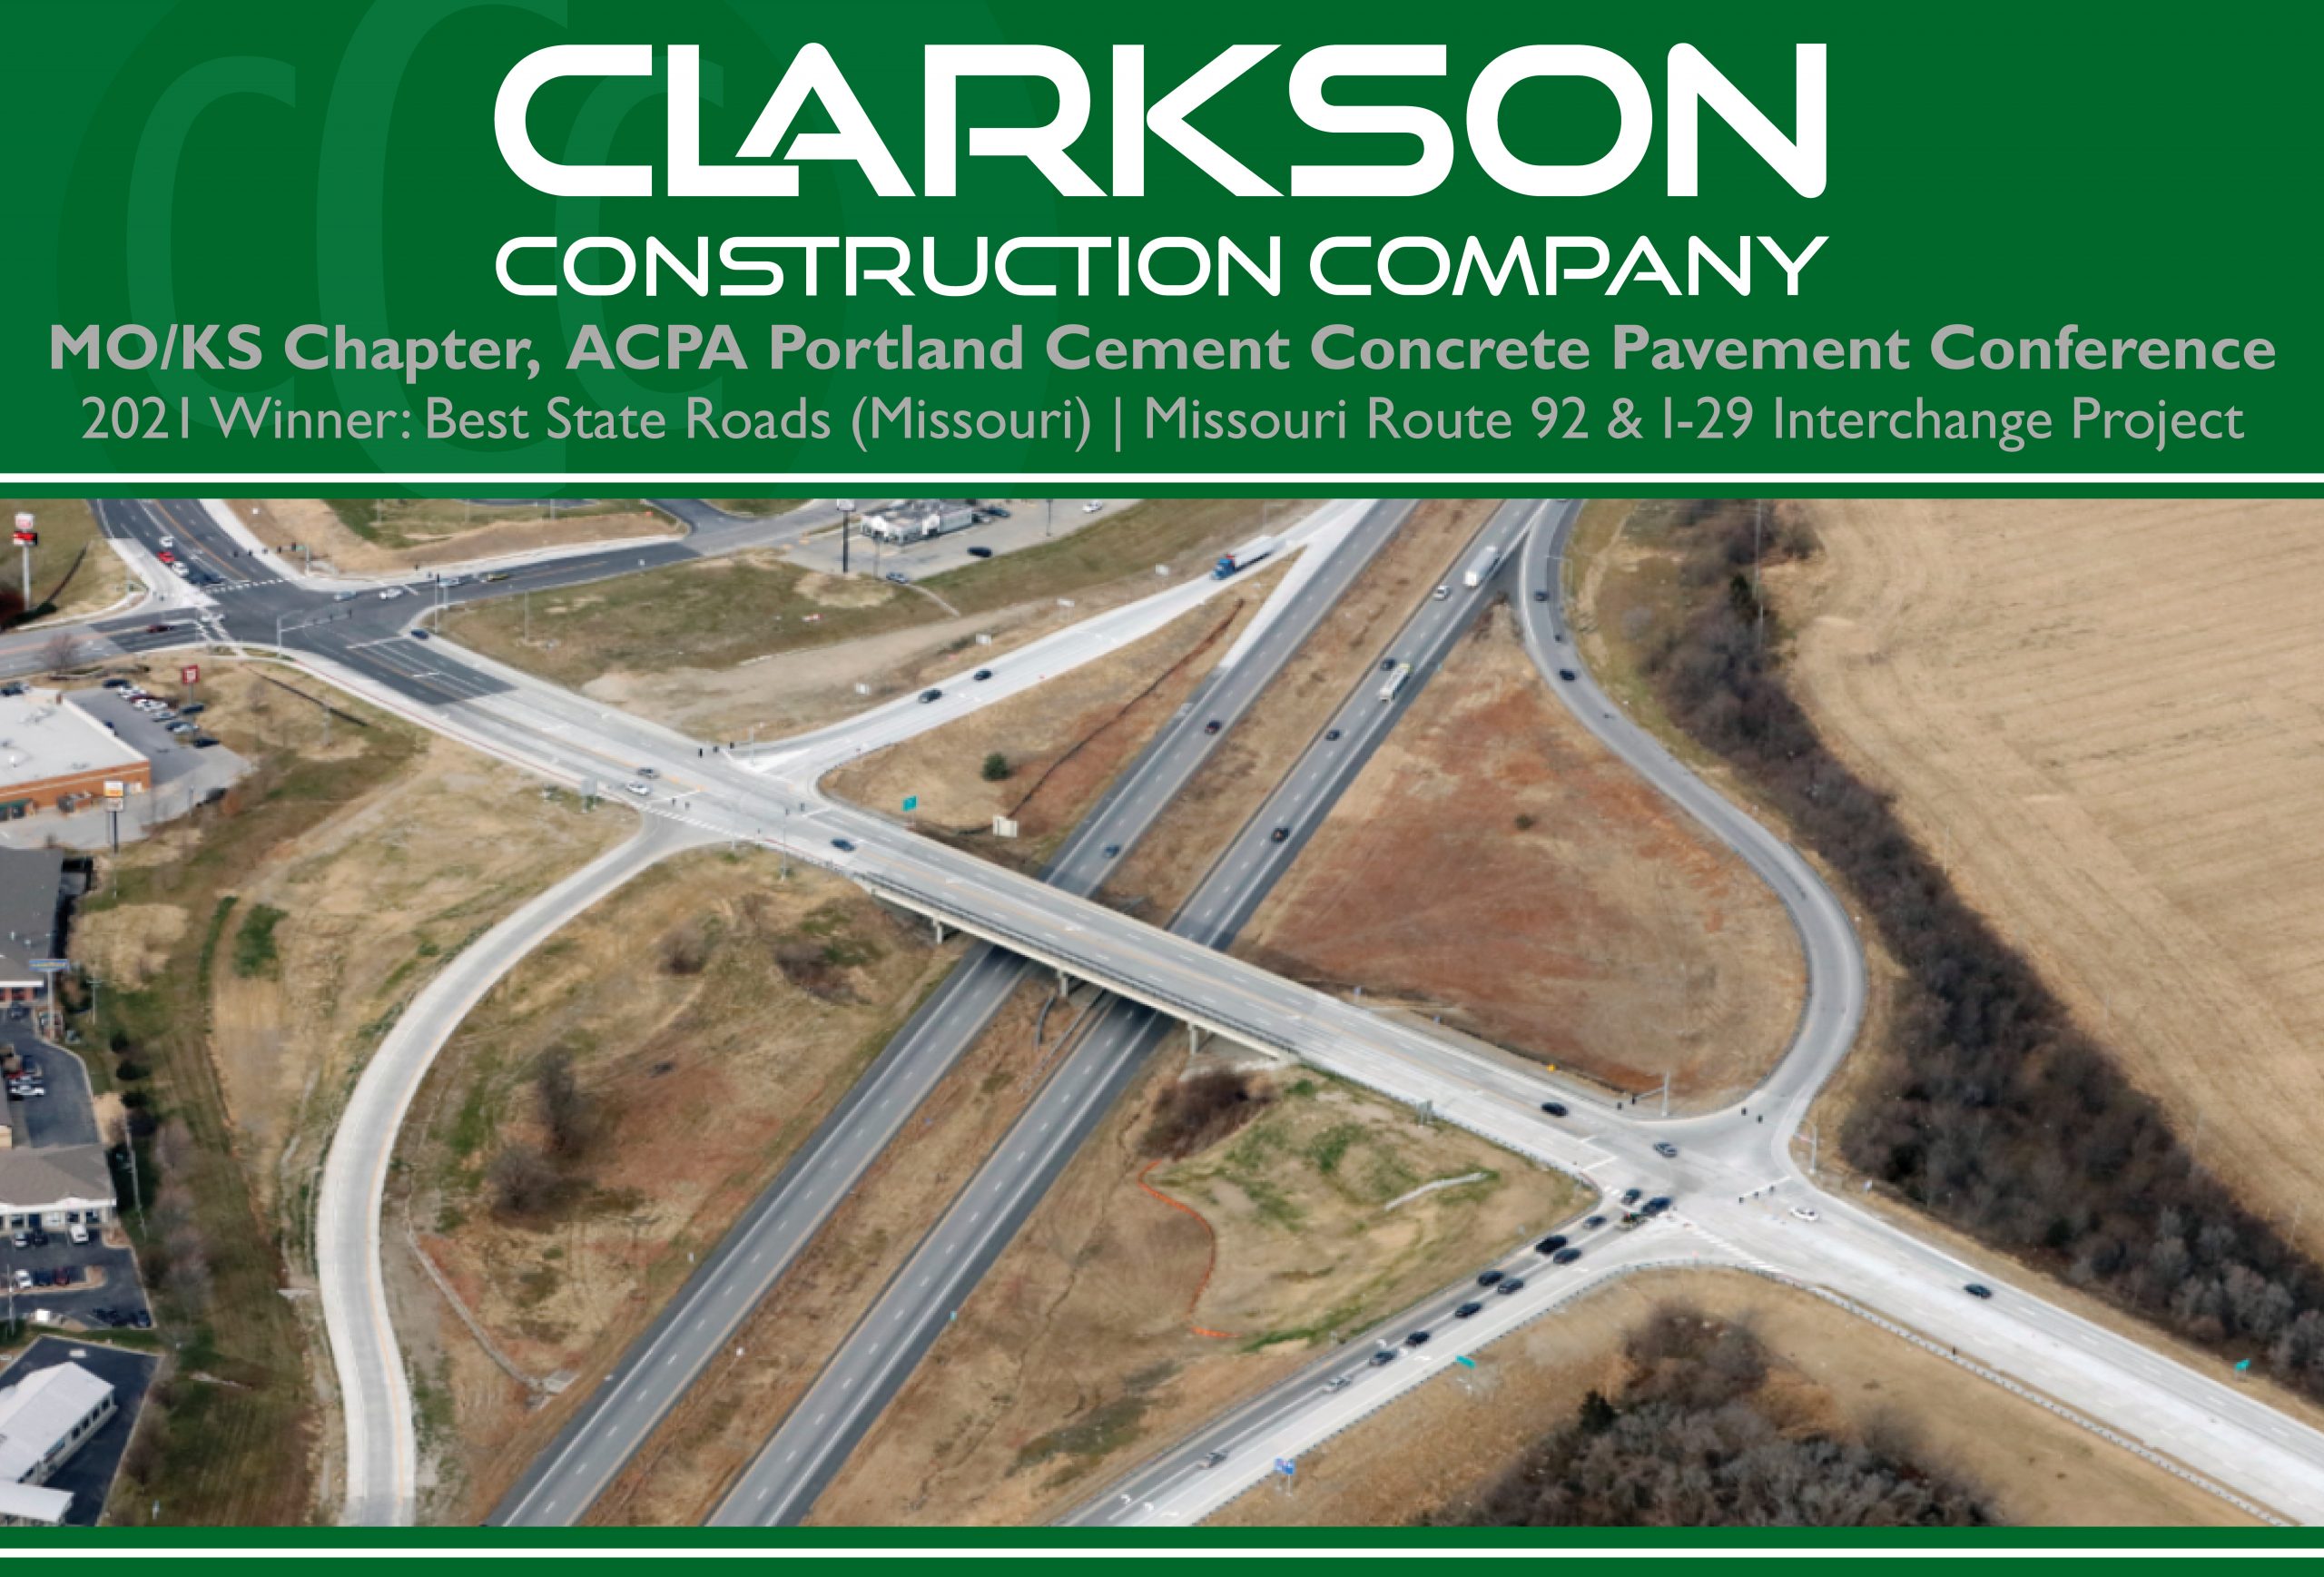 Missouri Route 92 & I-29 Interchange Project Awarded Project of the Year